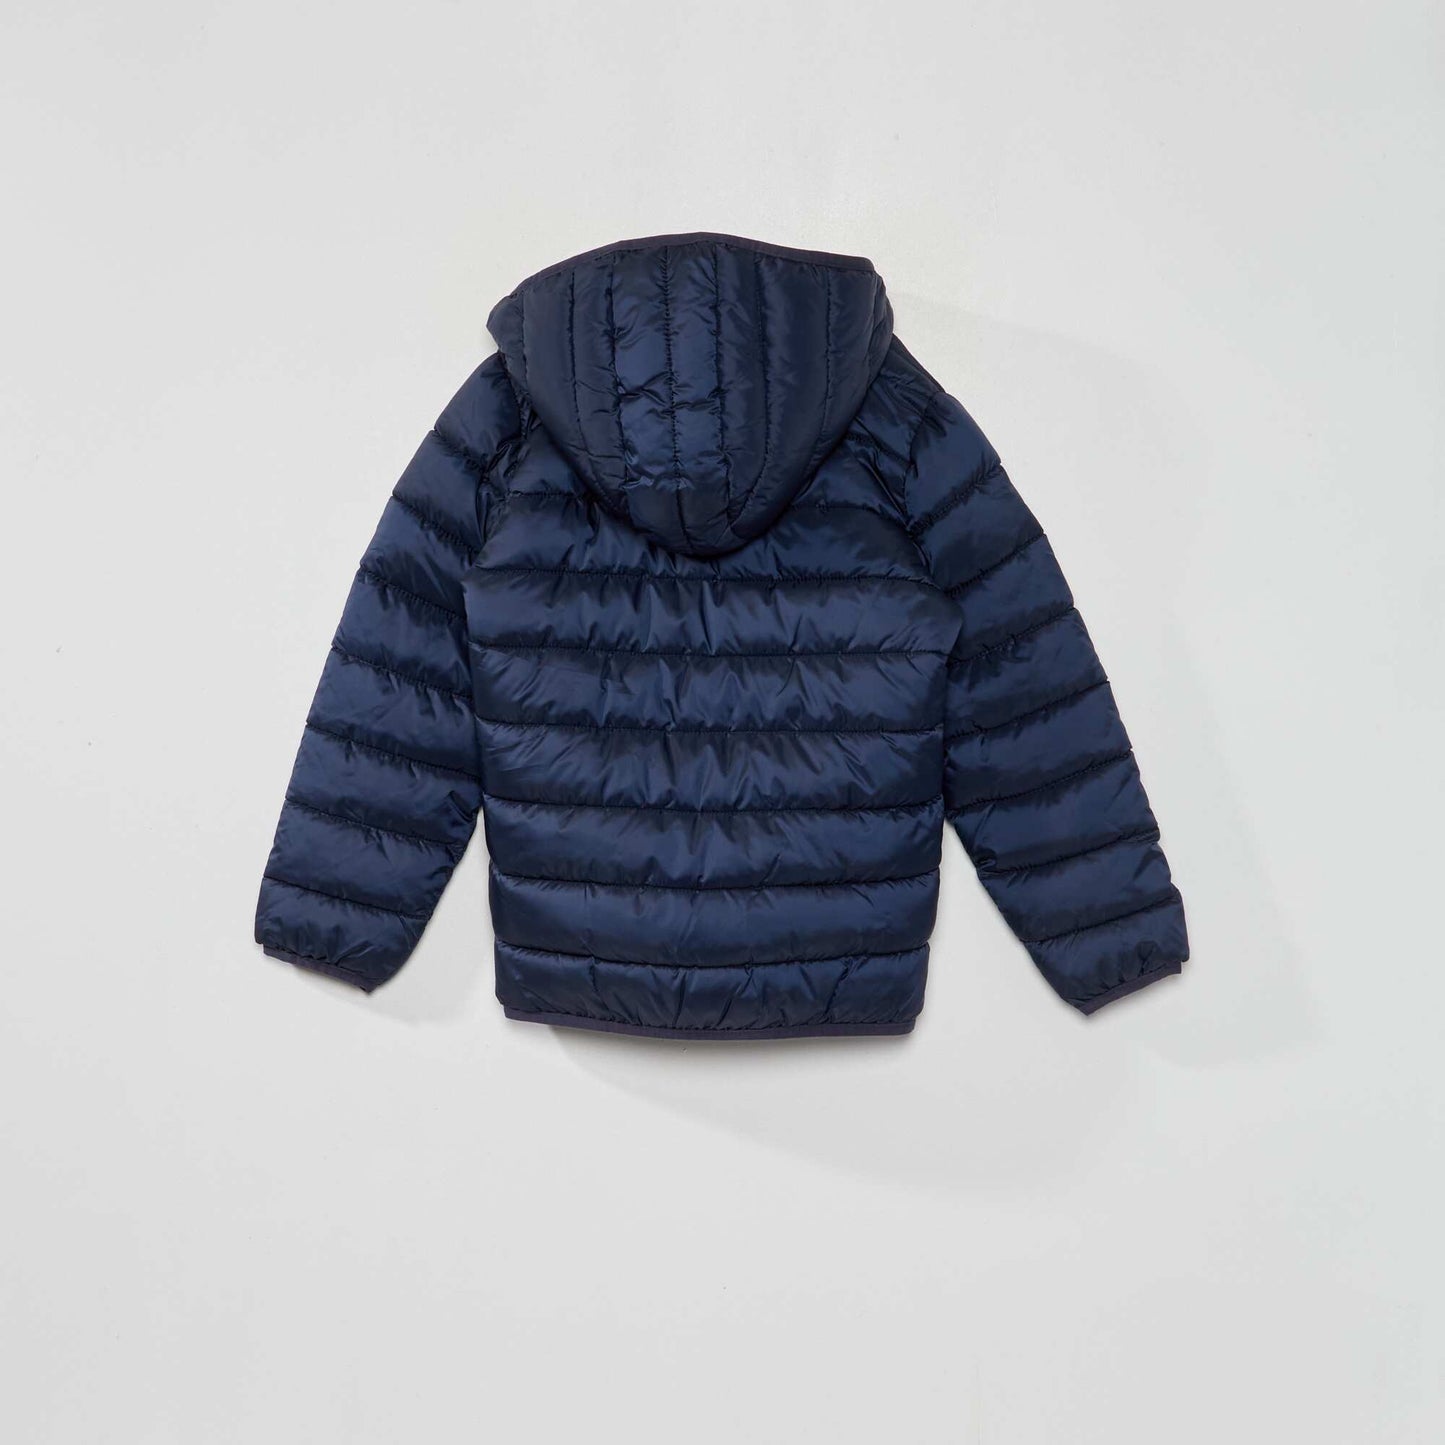 Padded jacket made from recycled bottles blue